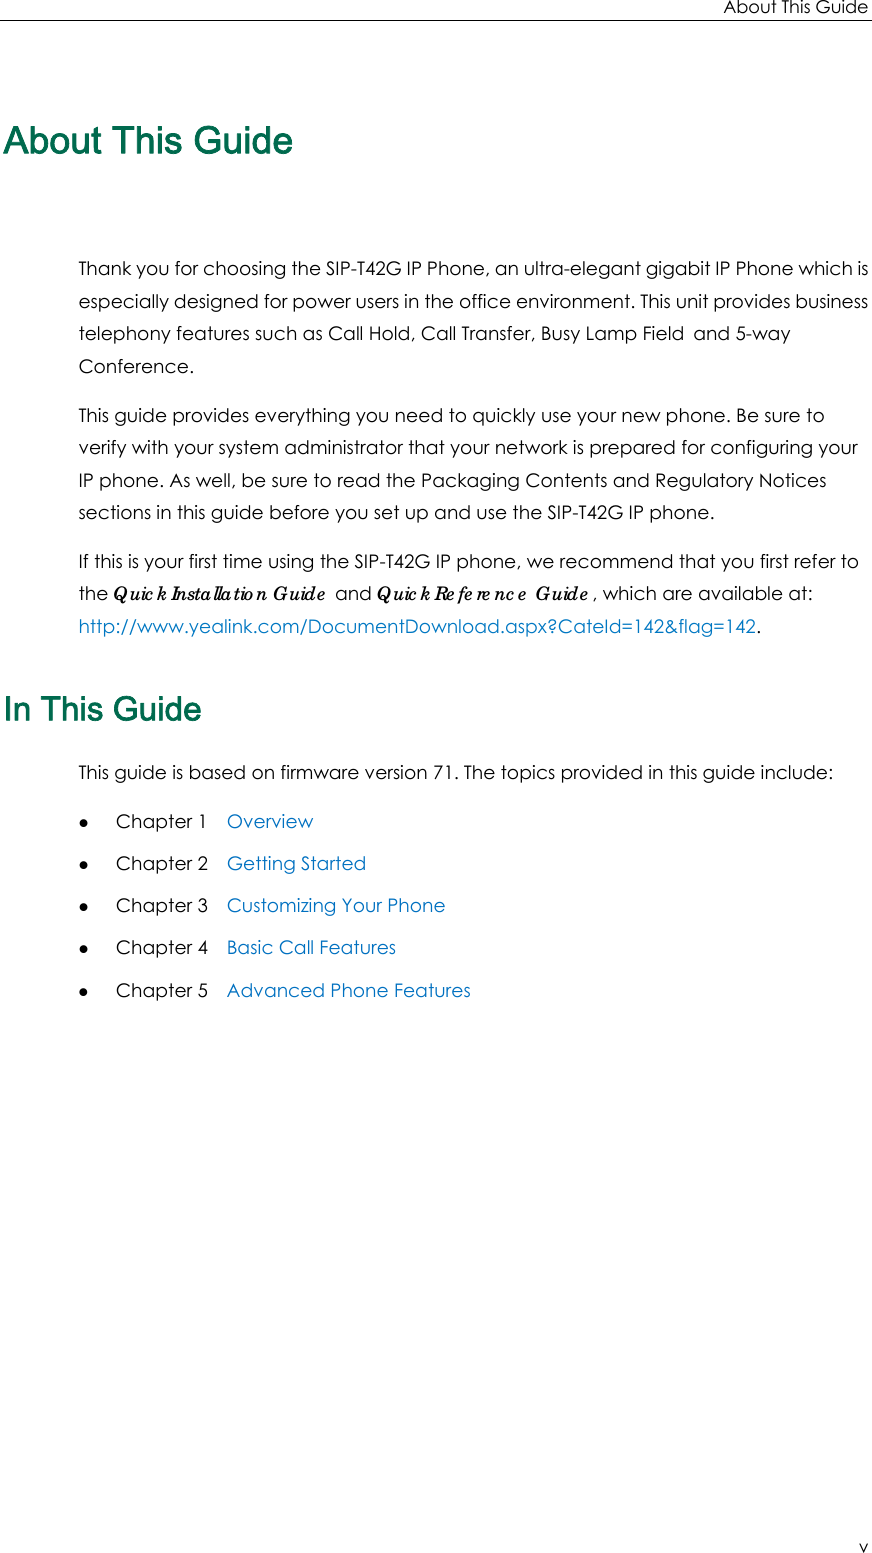 About This Guide v About This Guide Thank you for choosing the SIP-T42G IP Phone, an ultra-elegant gigabit IP Phone which is especially designed for power users in the office environment. This unit provides business telephony features such as Call Hold, Call Transfer, Busy Lamp Field and 5-way Conference. This guide provides everything you need to quickly use your new phone. Be sure to verify with your system administrator that your network is prepared for configuring your IP phone. As well, be sure to read the Packaging Contents and Regulatory Notices sections in this guide before you set up and use the SIP-T42G IP phone. If this is your first time using the SIP-T42G IP phone, we recommend that you first refer to the Quick Installation Guide and Quick Reference Guide, which are available at: http://www.yealink.com/DocumentDownload.aspx?CateId=142&amp;flag=142. In This Guide This guide is based on firmware version 71. The topics provided in this guide include: z Chapter 1    Overview z Chapter 2    Getting Started z Chapter 3    Customizing Your Phone z Chapter 4    Basic Call Features z Chapter 5    Advanced Phone Features  